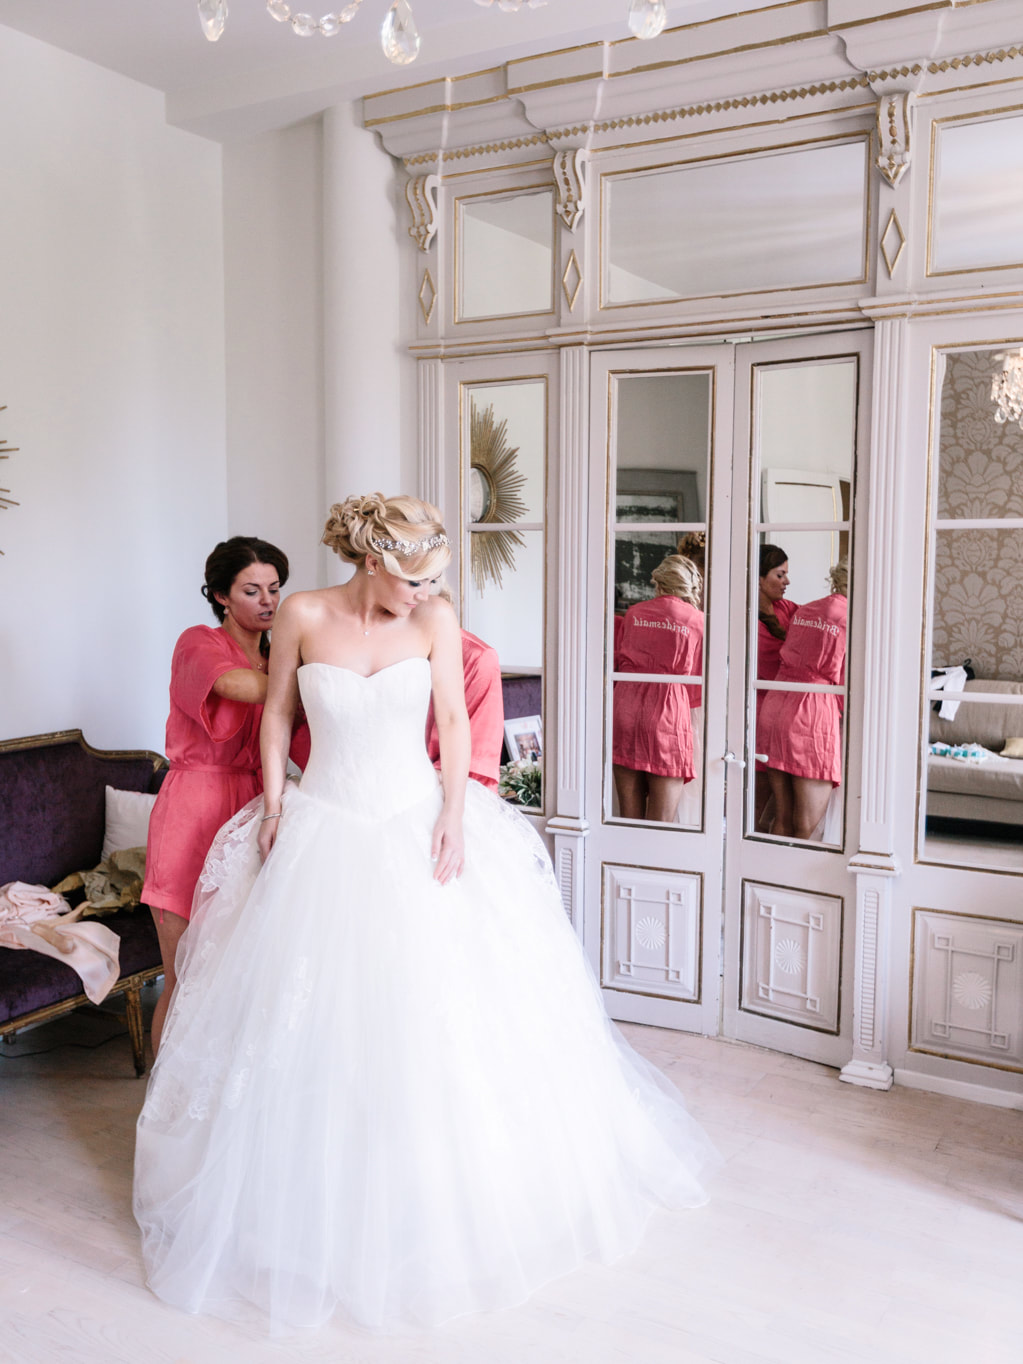 Our wedding in Provence part 2 at Chateau de Massillan by The Belle Blog